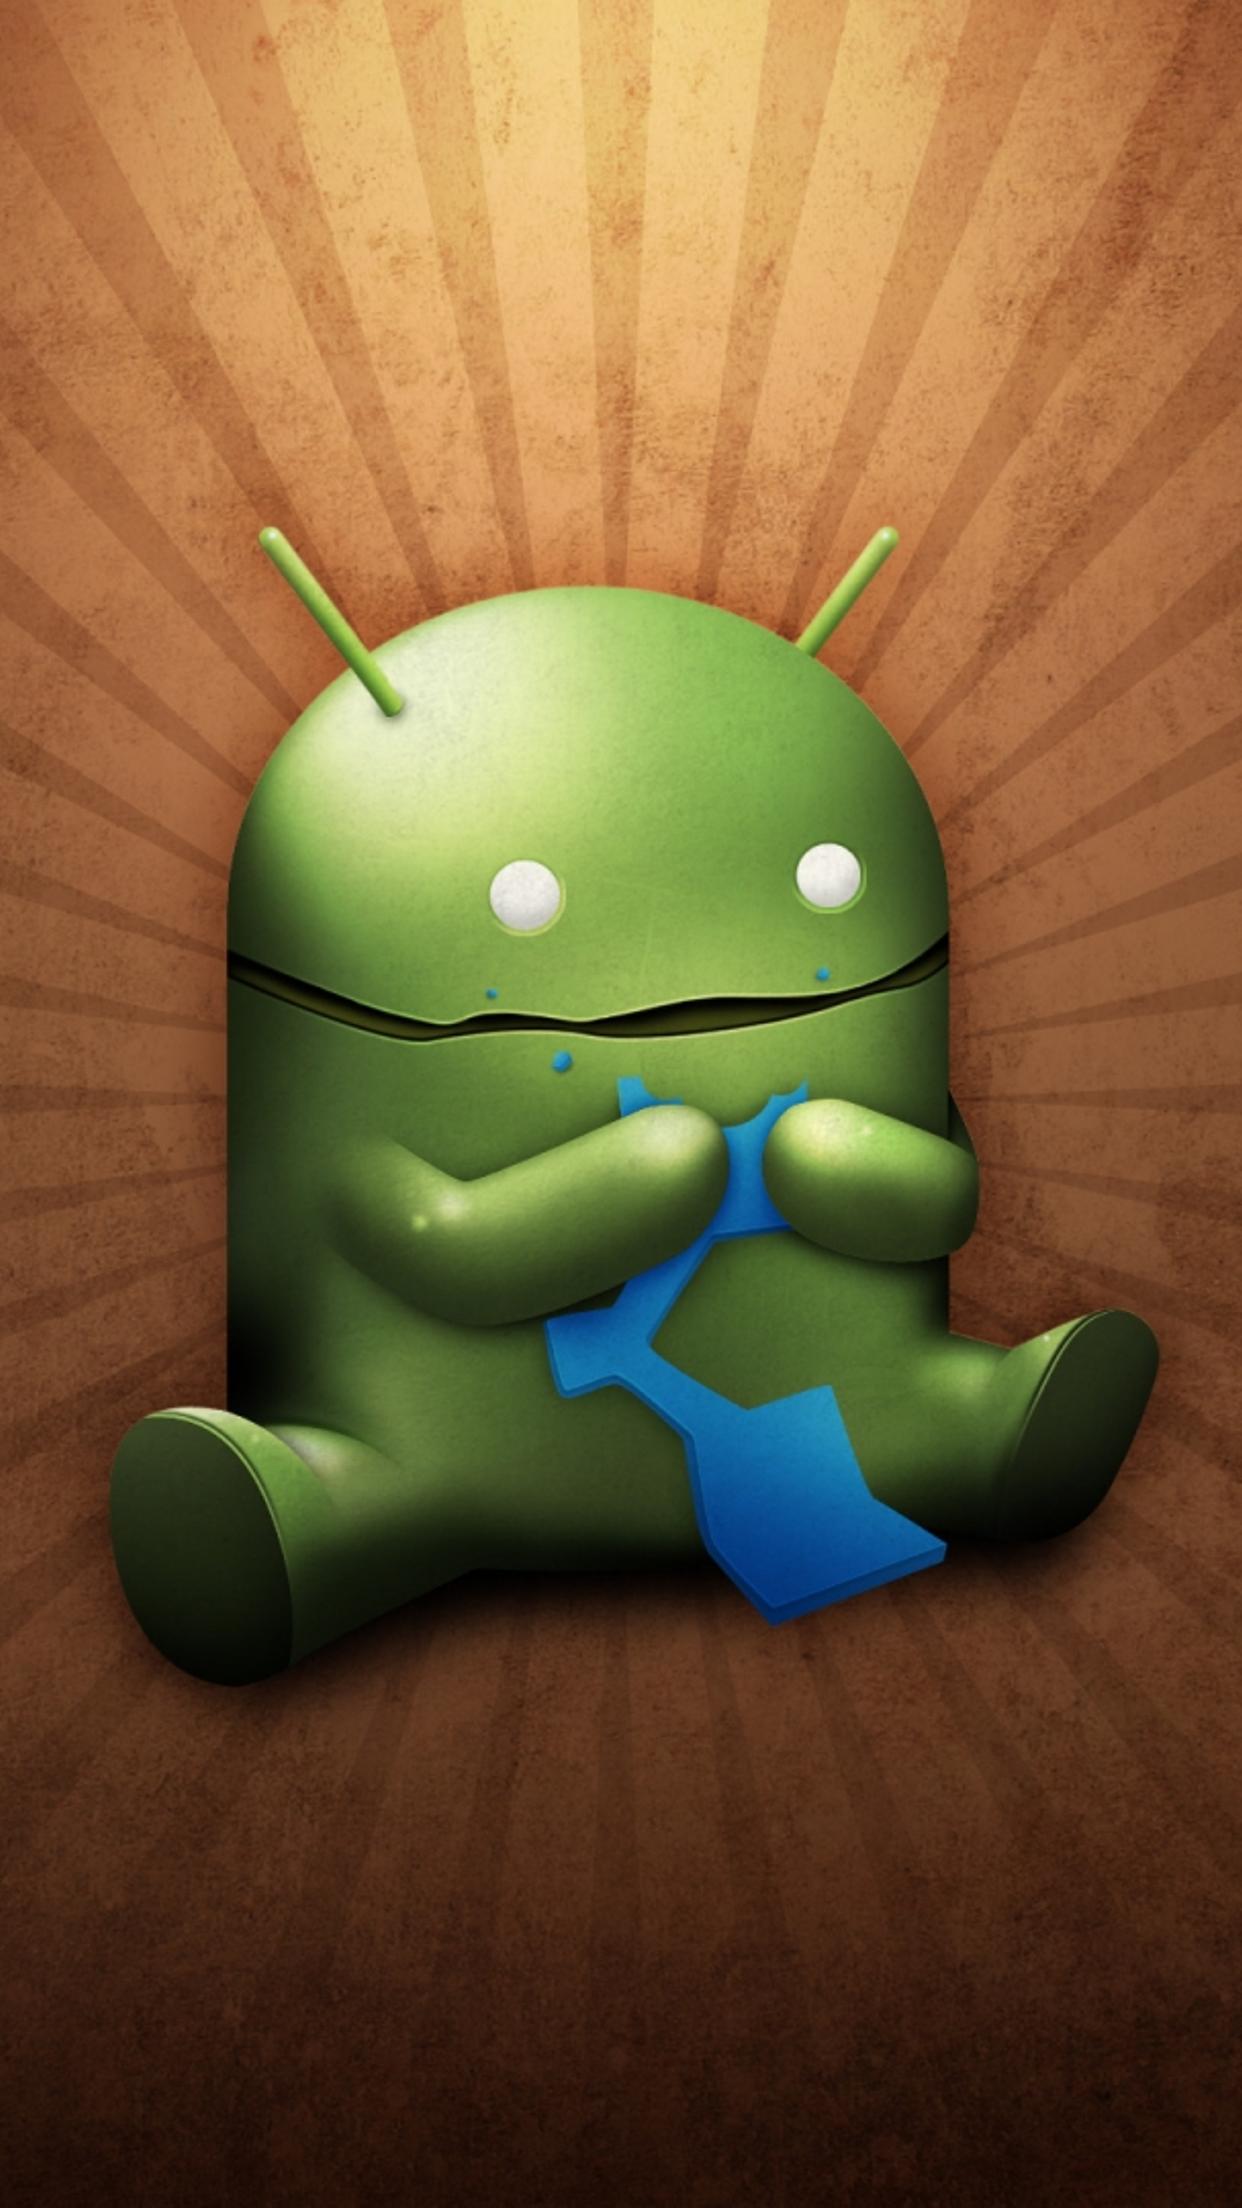 Funny android logo eating